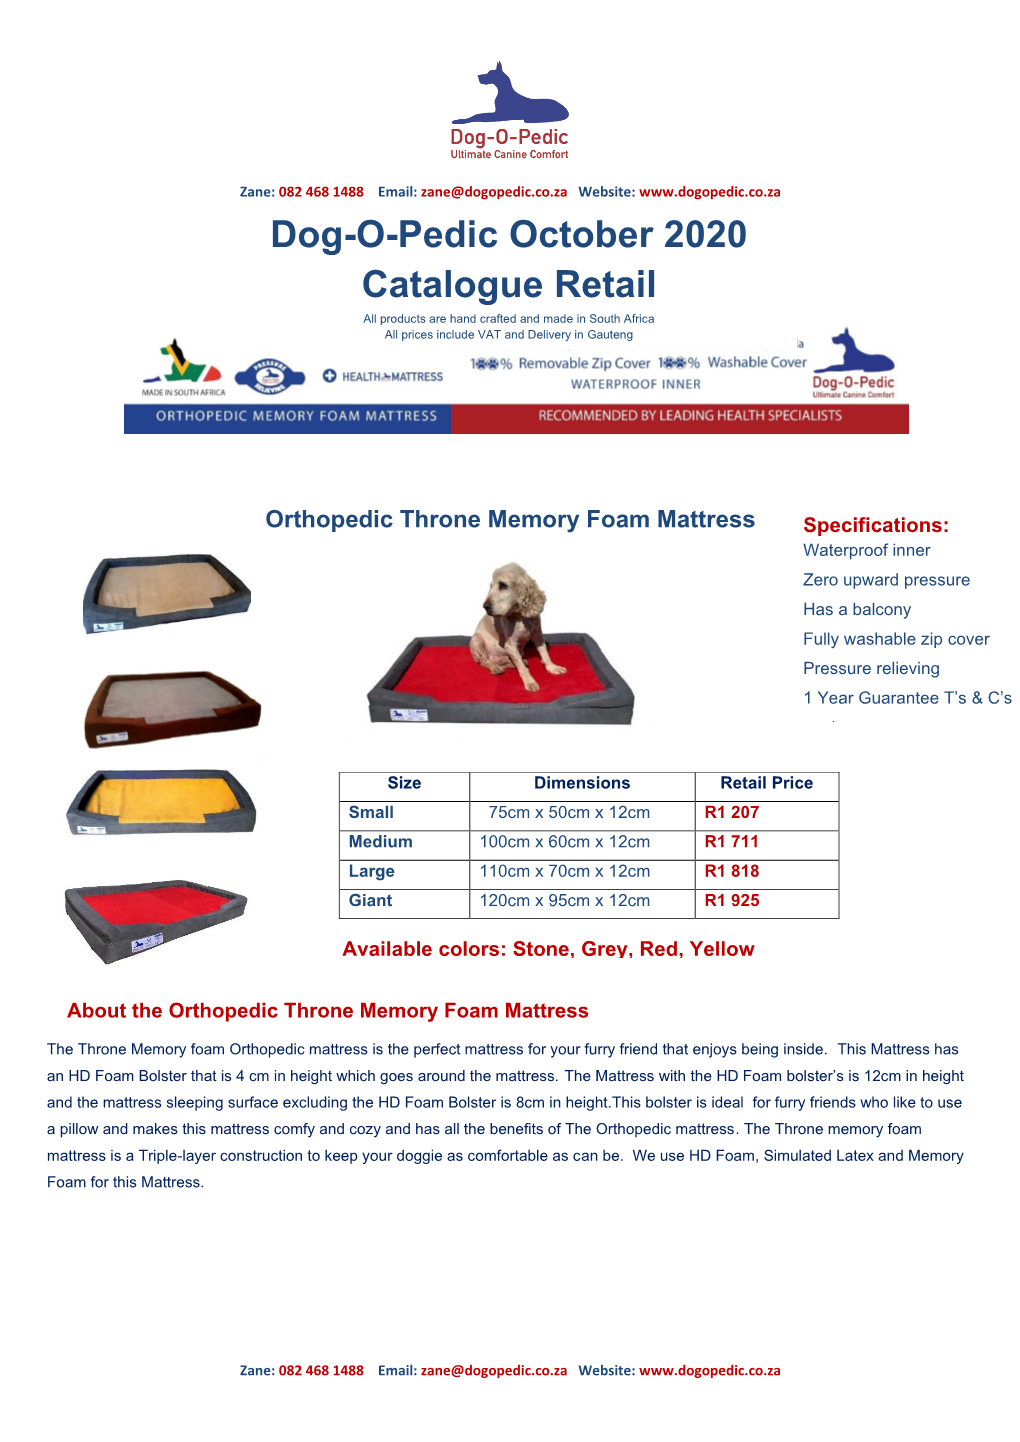 Dog-O-Pedic October 2020 Catalogue Retail All Products Are Hand Crafted and Made in South Africa All Prices Include VAT and Delivery in Gauteng